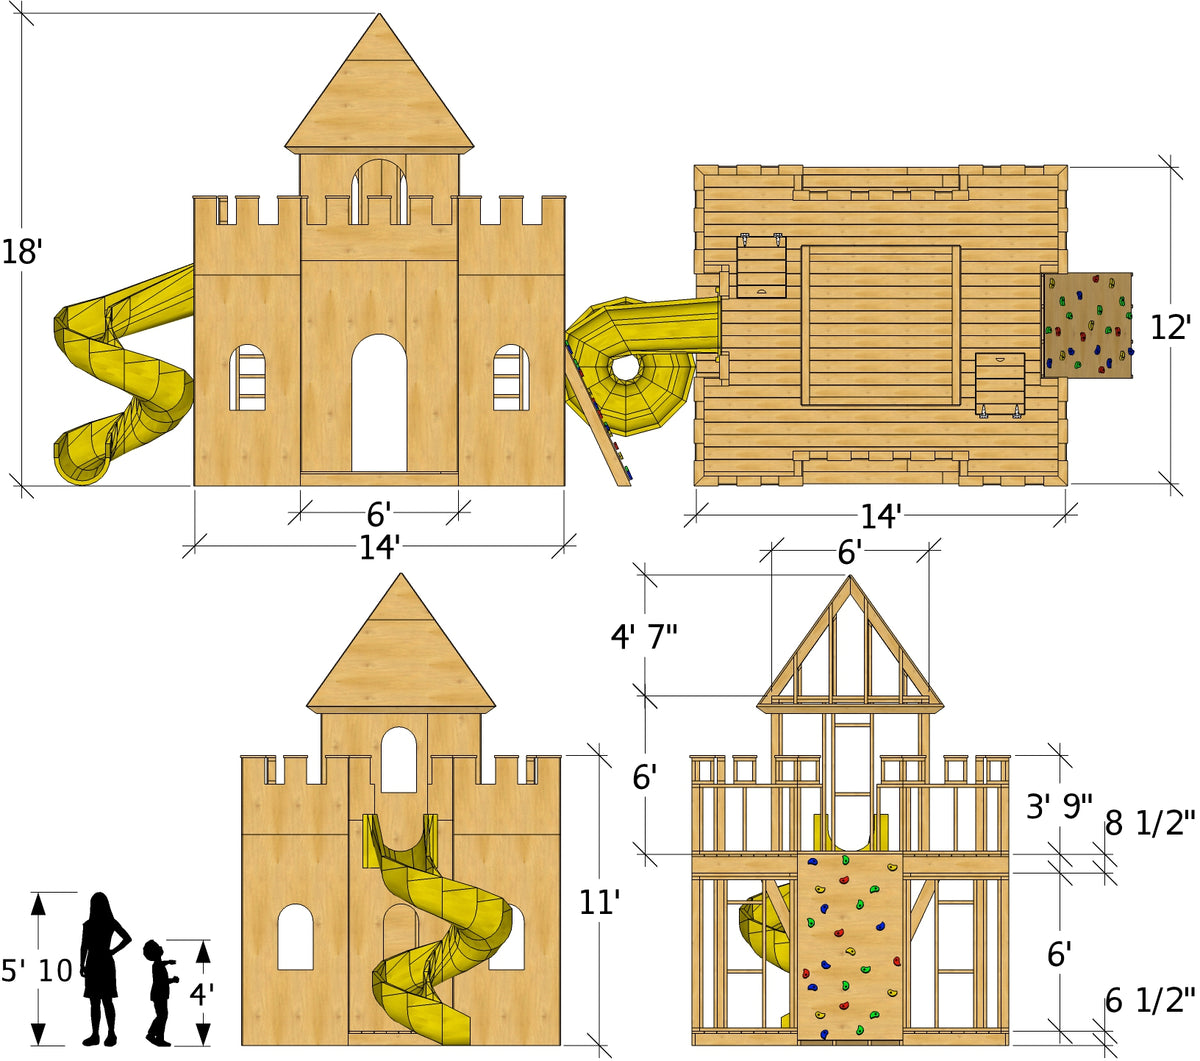 12x14 Enchanted Castle Playhouse Plan for Kids - Paul's Playhouses